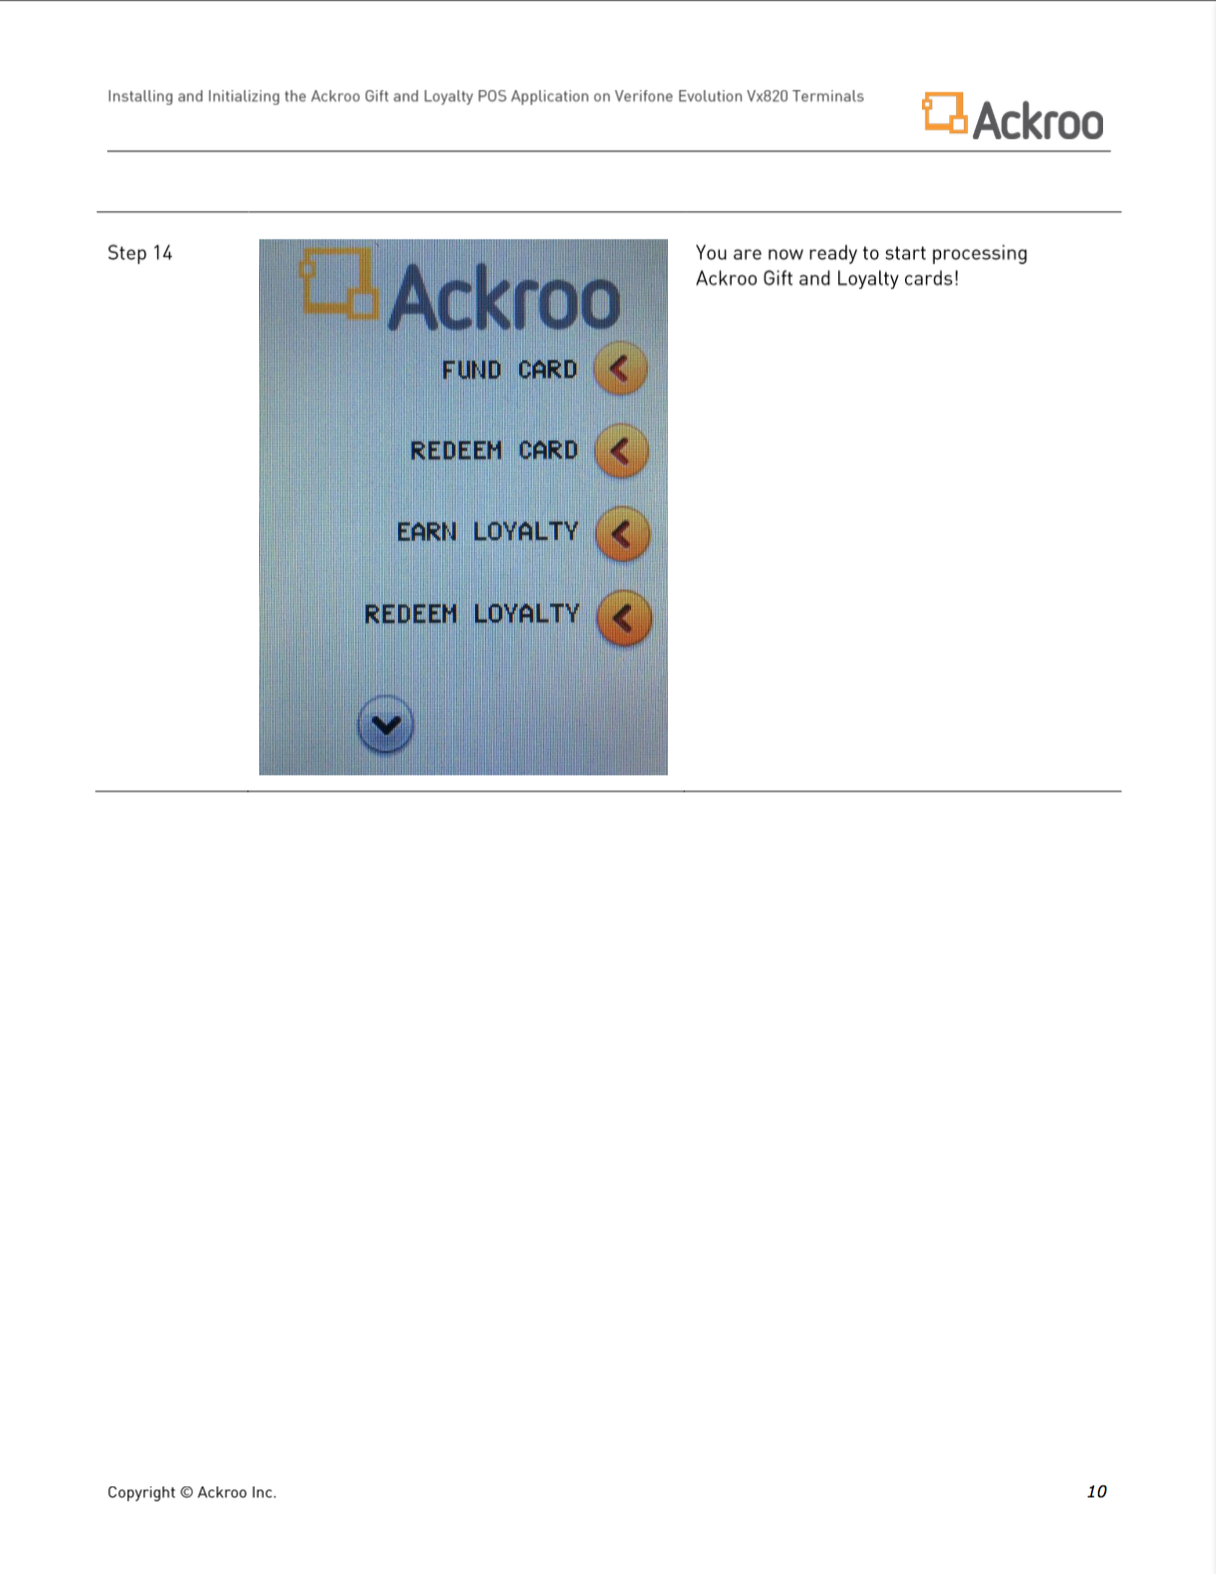 Verifone_Evolution_Vx820_Ackapp_installation_guide_-_Page_10.png